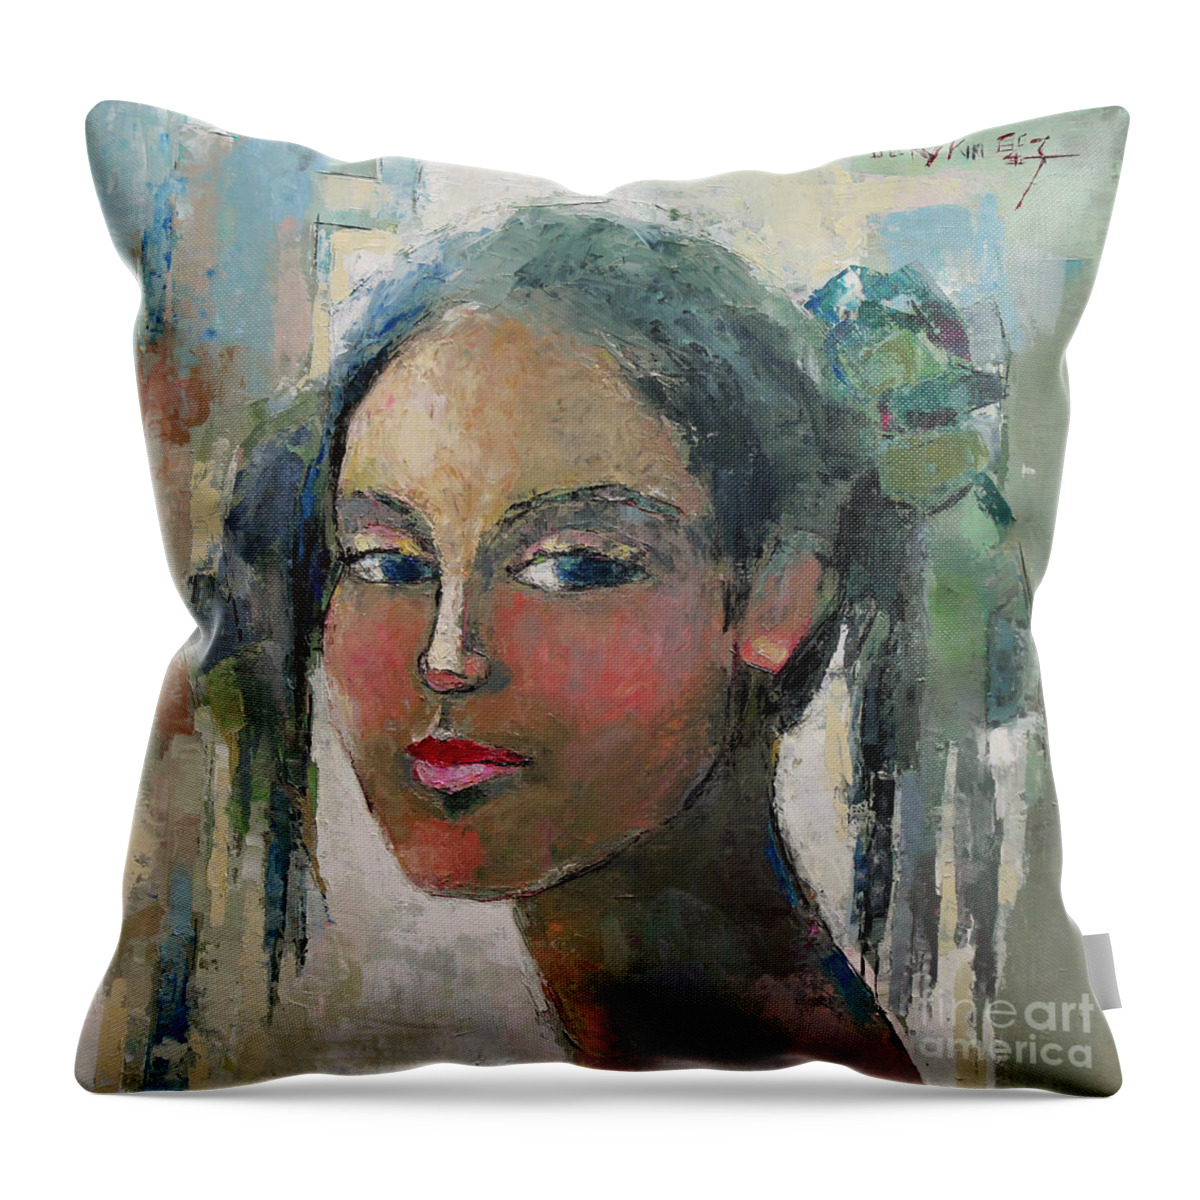 Oil Throw Pillow featuring the painting Blue Eyes by Becky Kim